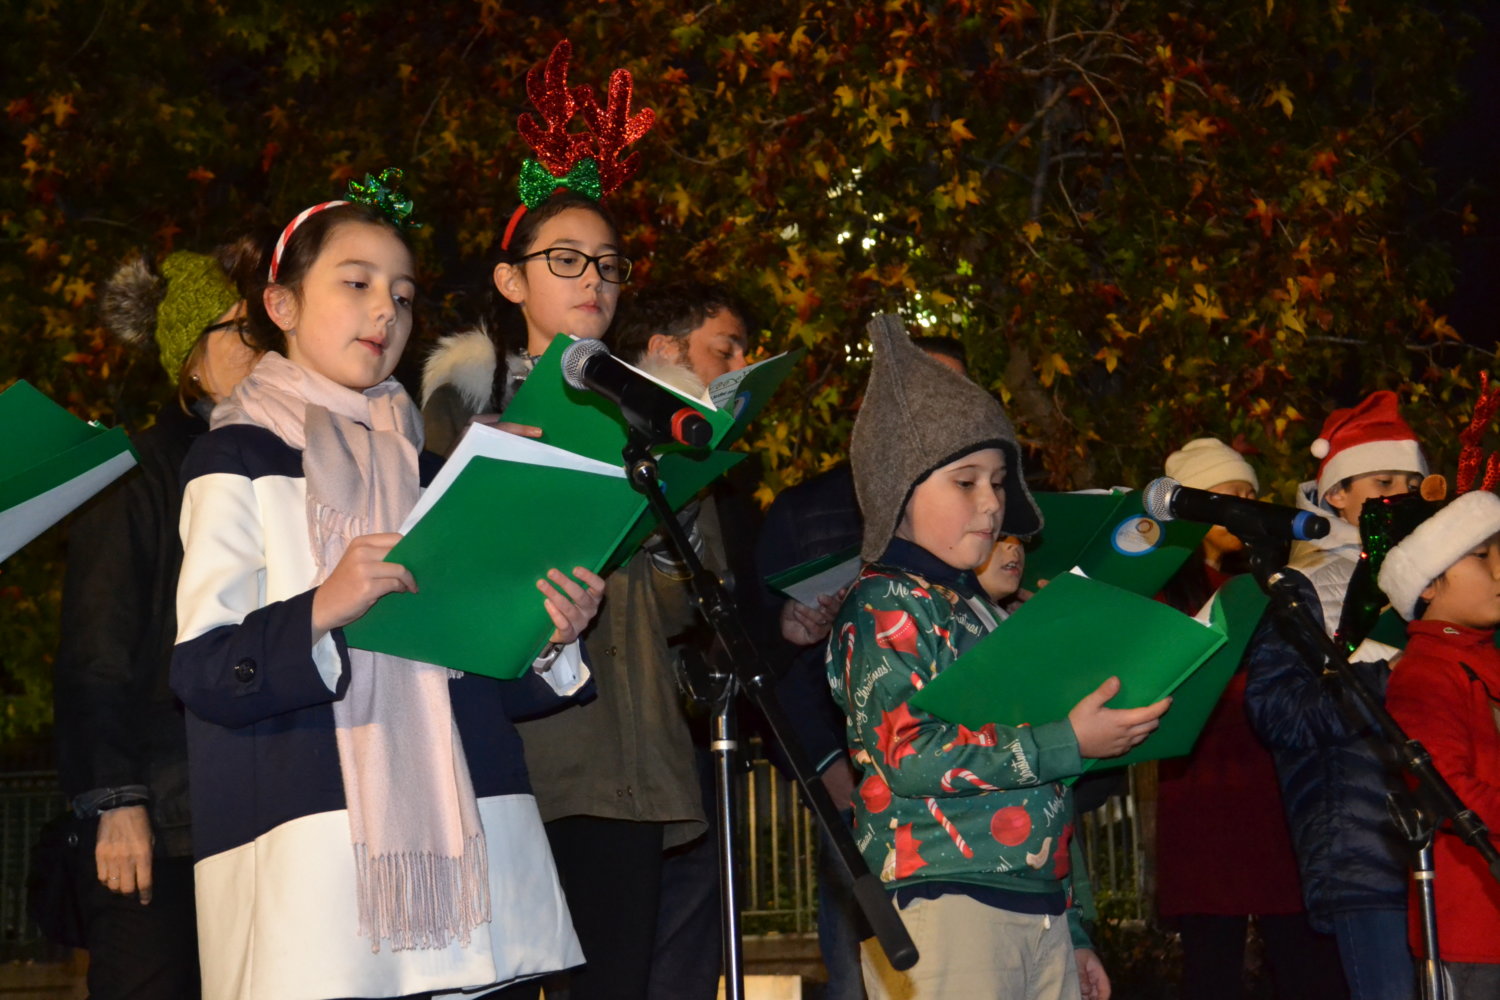 Kick off holiday cheer a little early next Thursday, Nov. 18 at the South  Coast Plaza Annual Tree Lighting Ceremony! Catch our students…